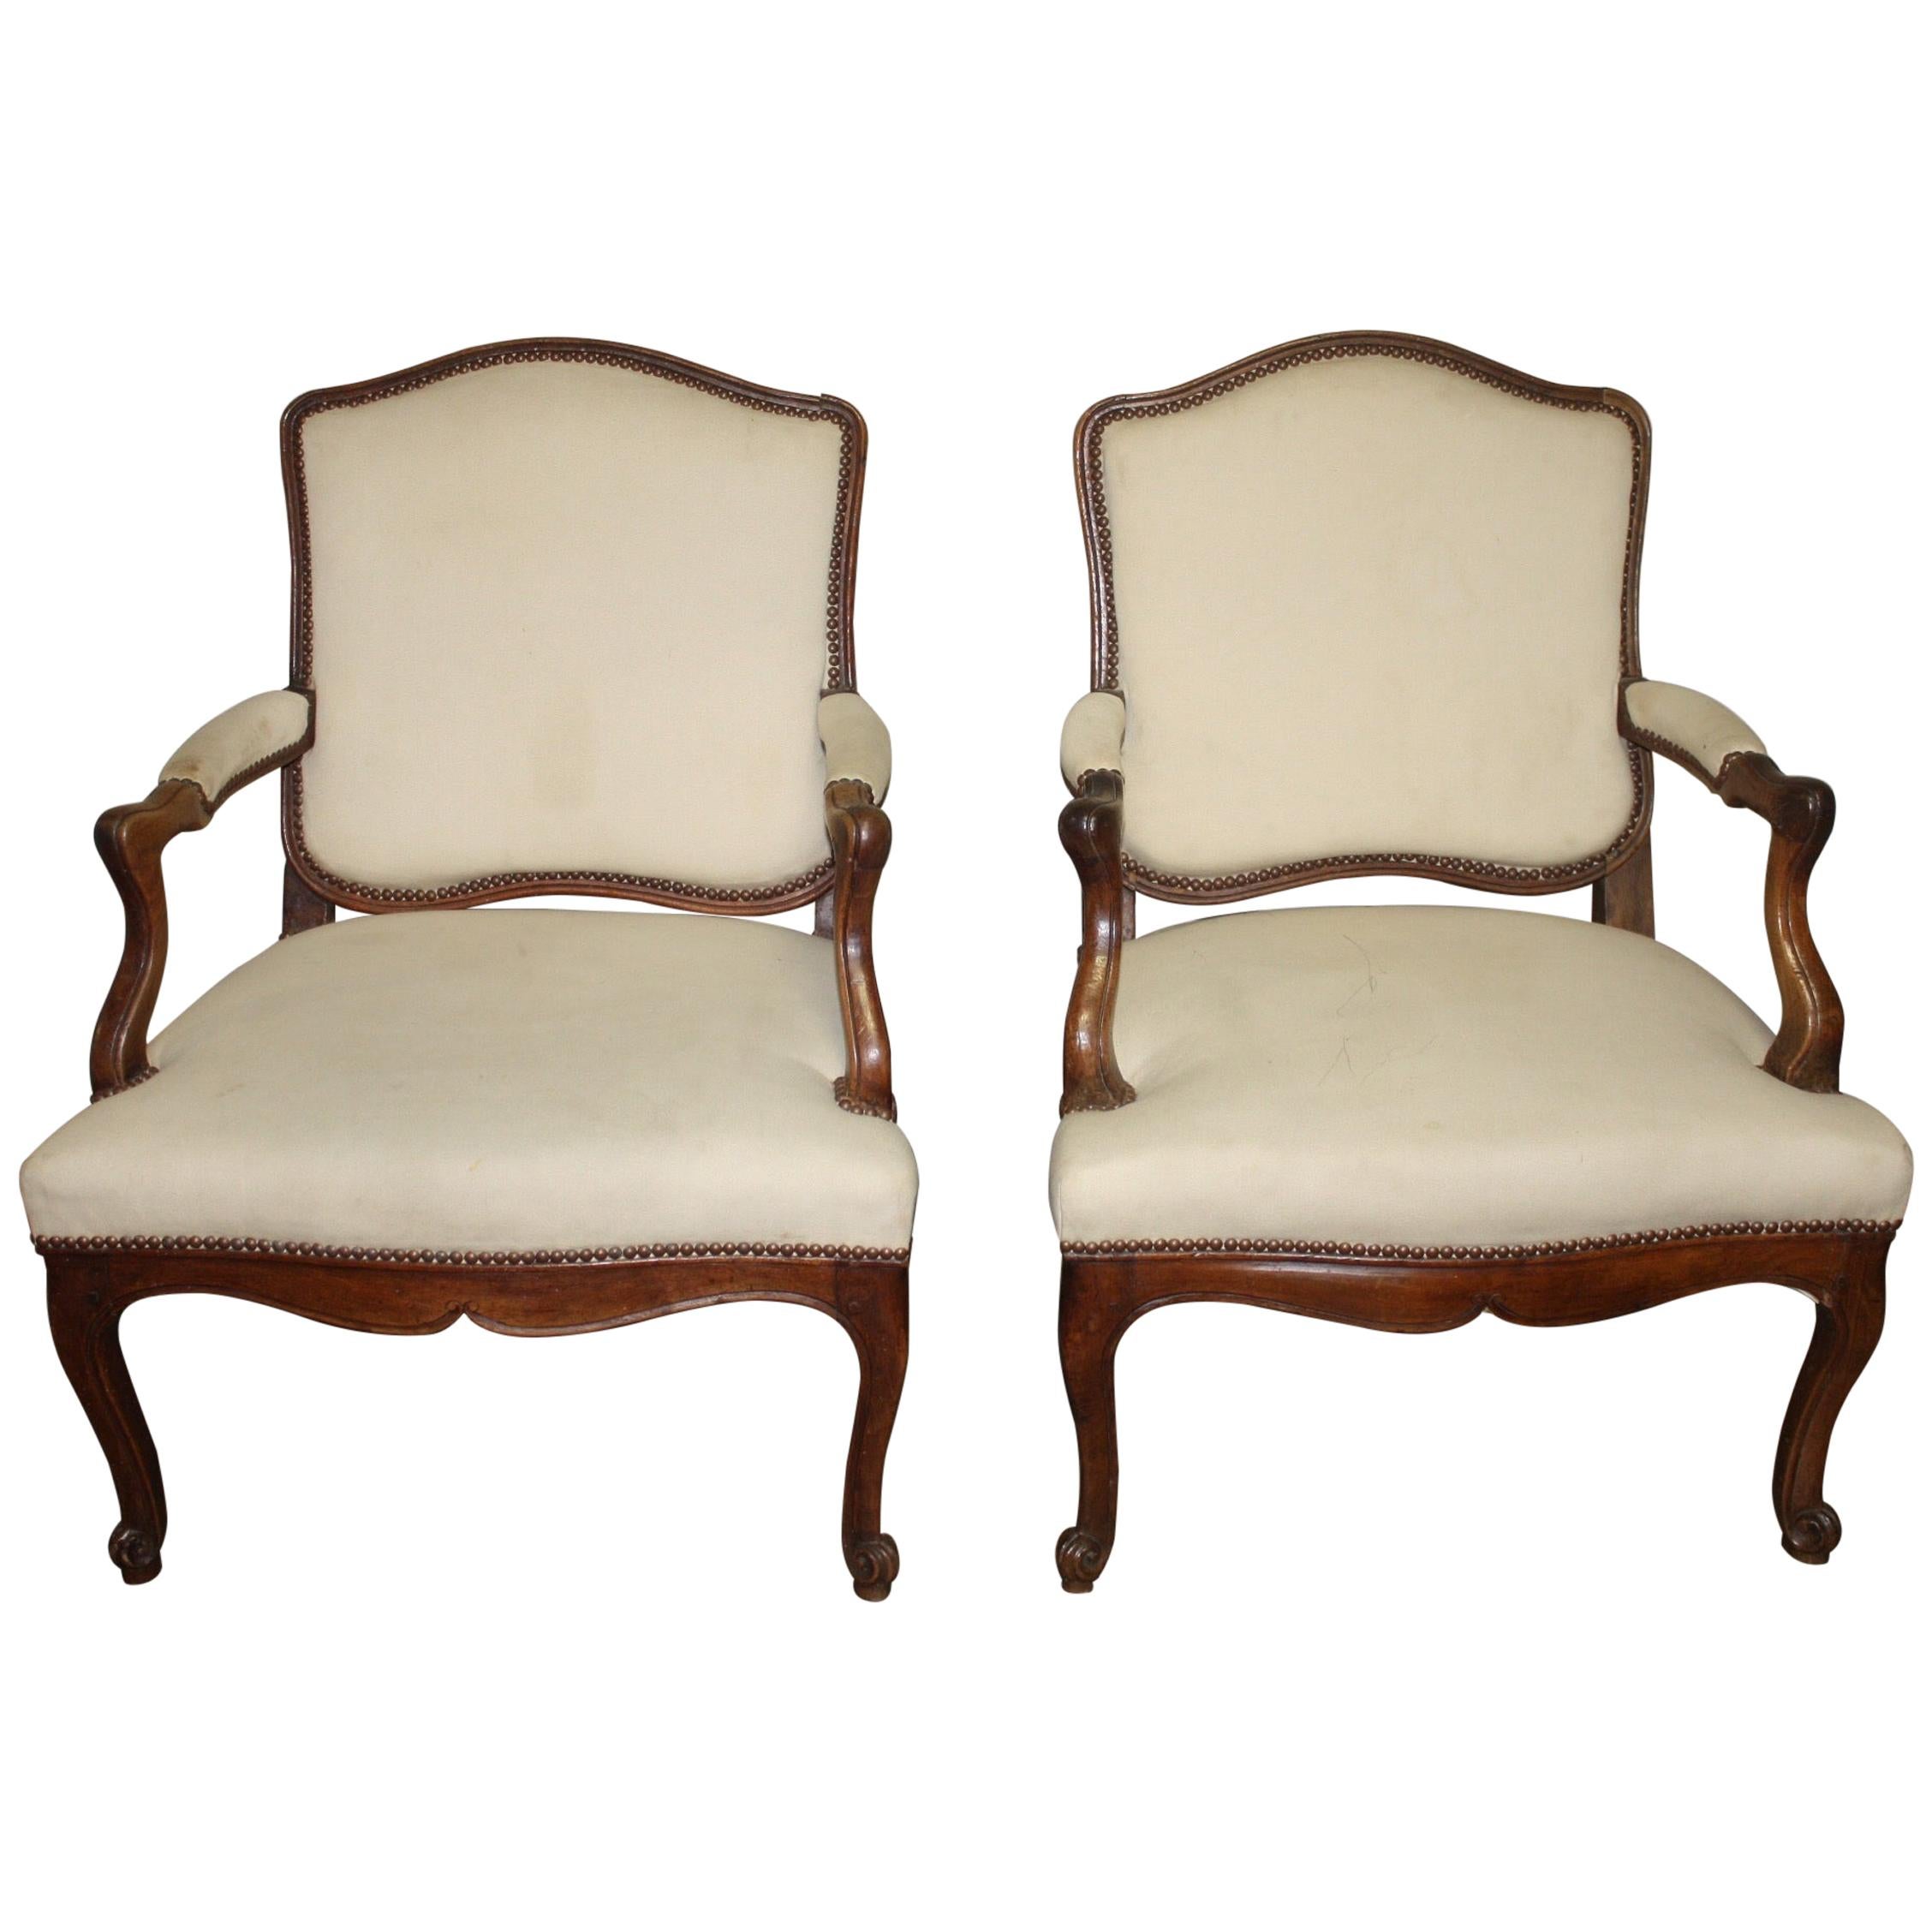 Beautiful Pair of 18th Century French Armchairs